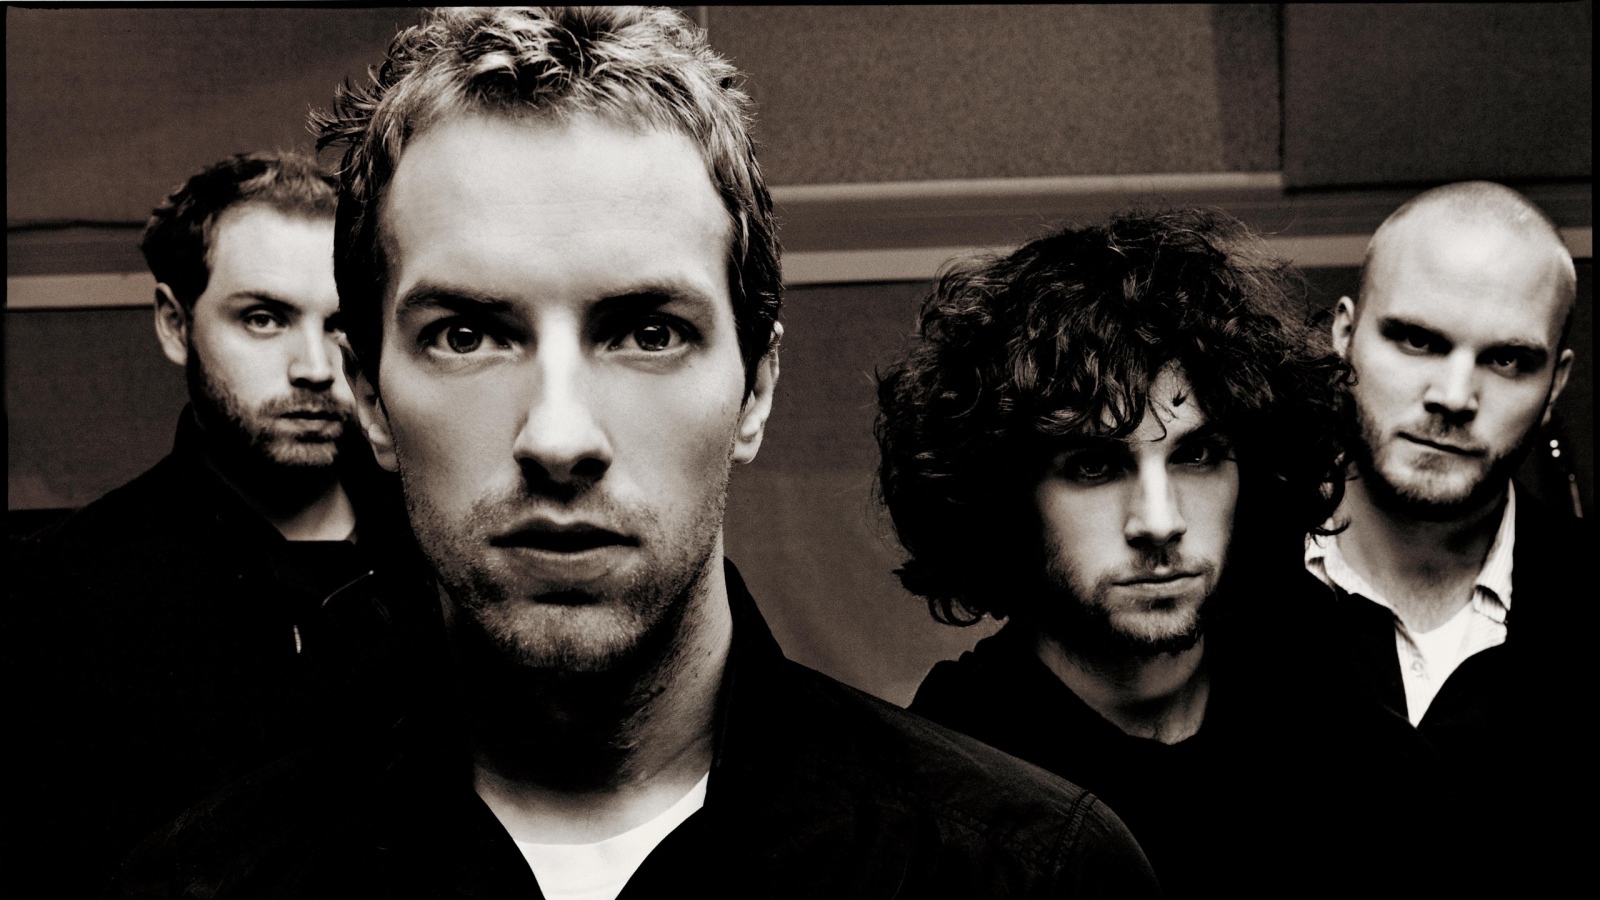 Coldplay the whole band